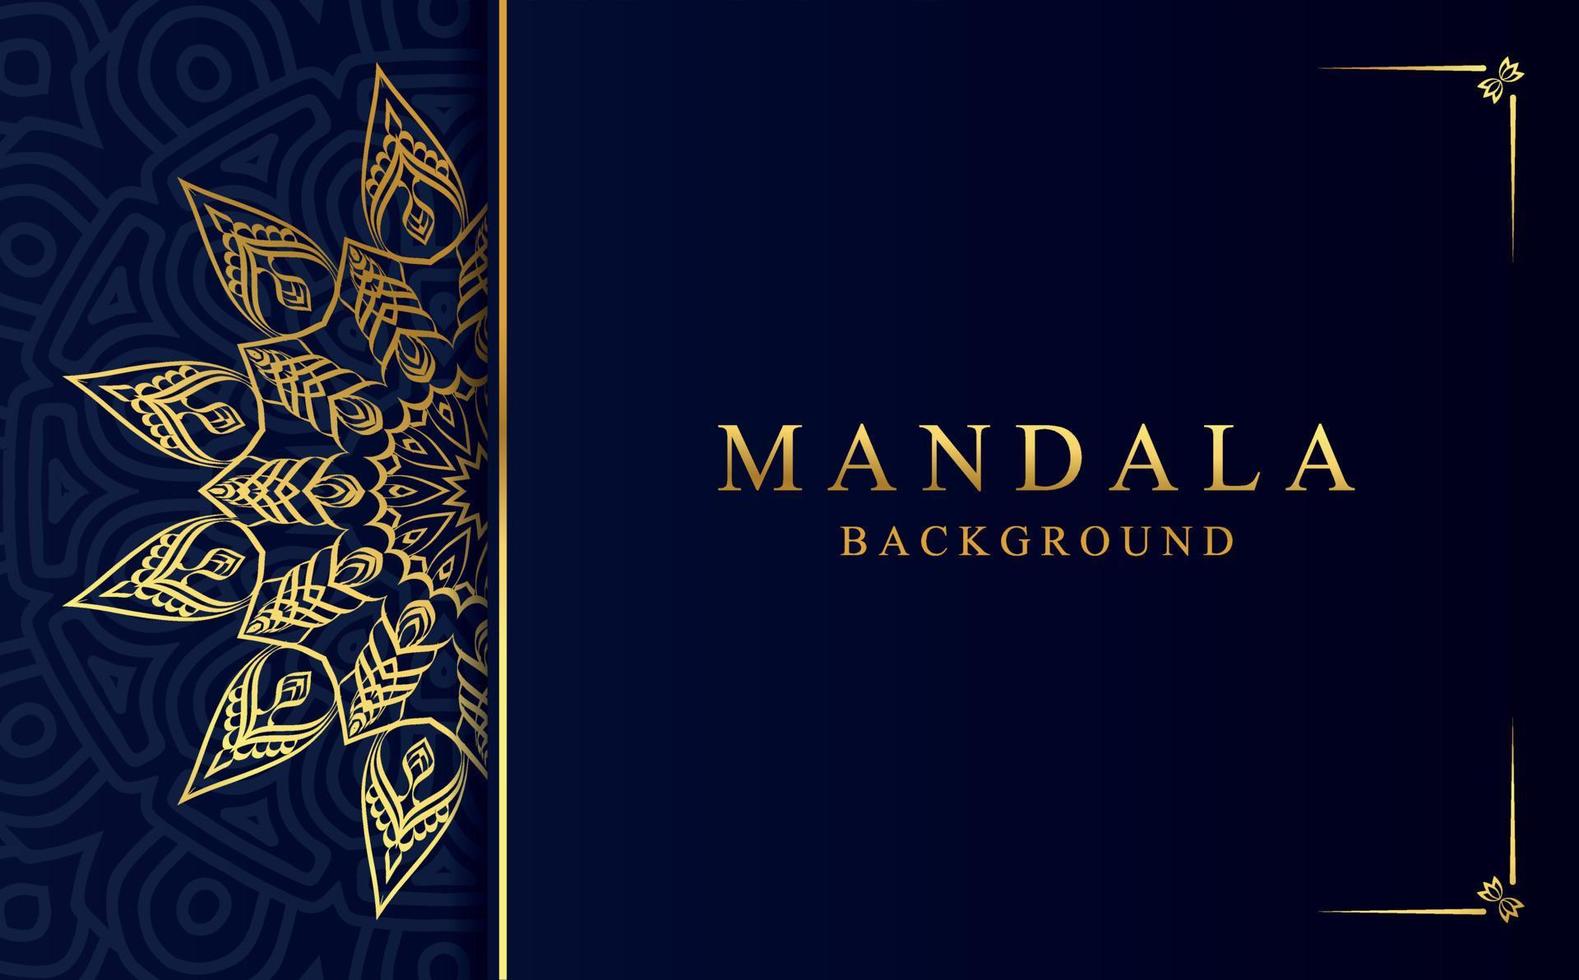 Luxury ornamental mandala background with golden arabesque pattern in Arabic style vector